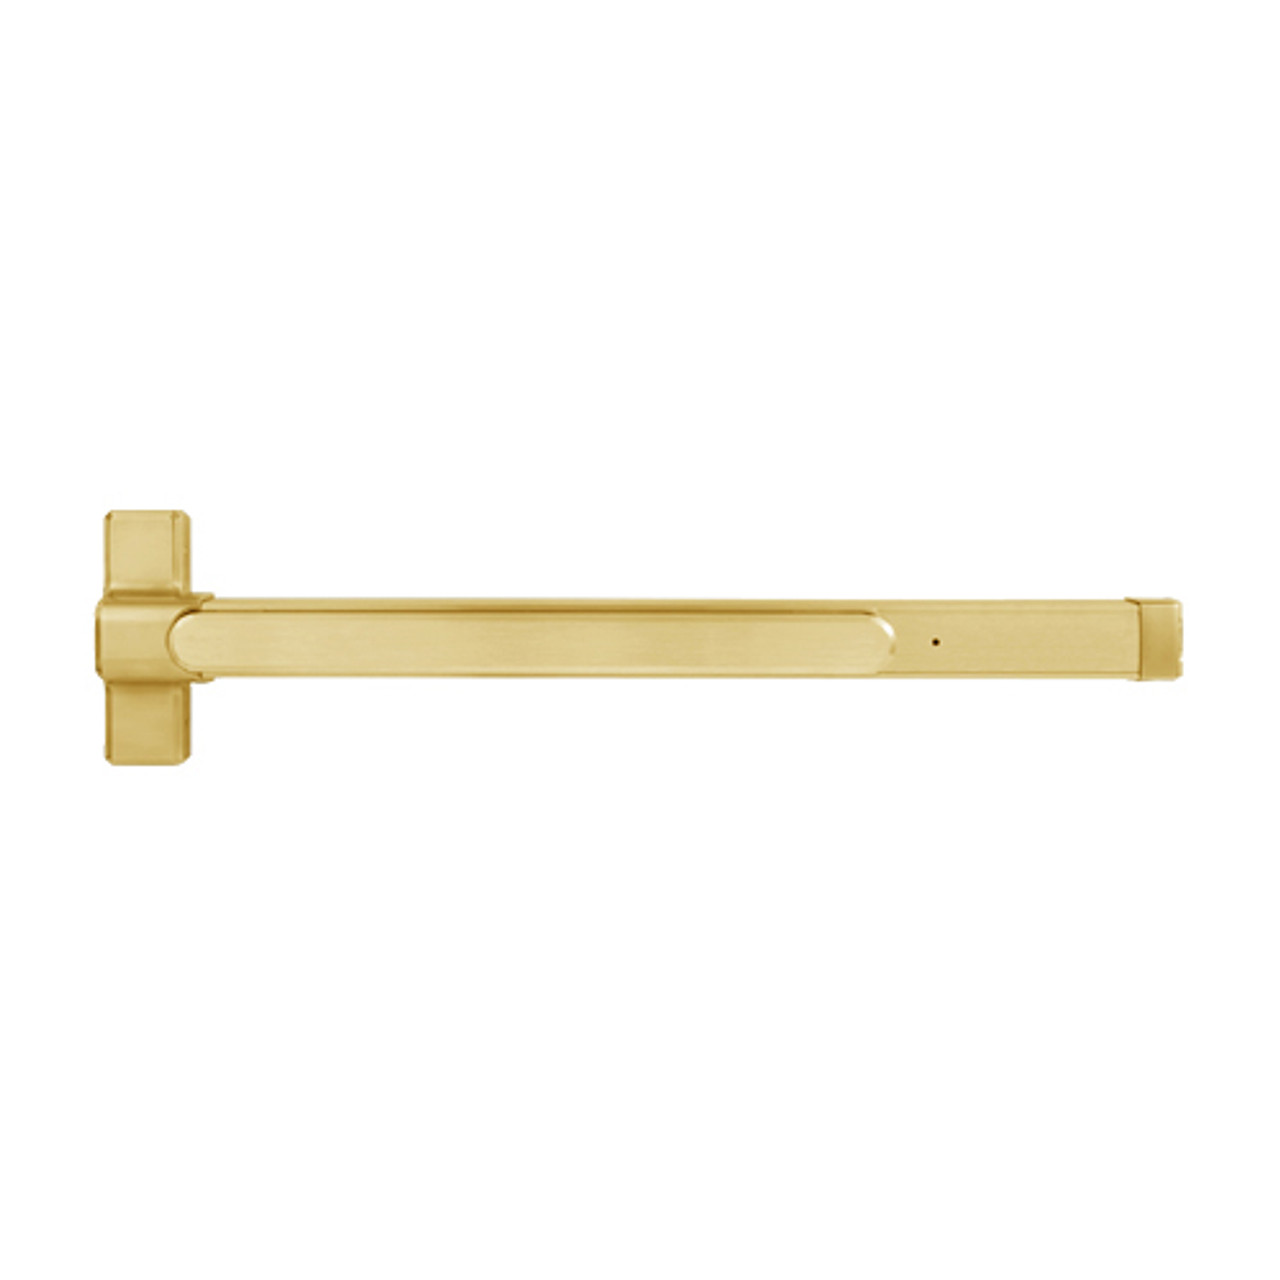 QED127LR-48-7-605 Stanley QED100 Series Heavy Duty Concealed Vertical Rod Hex Dog Exit Device in Bright Brass Finish